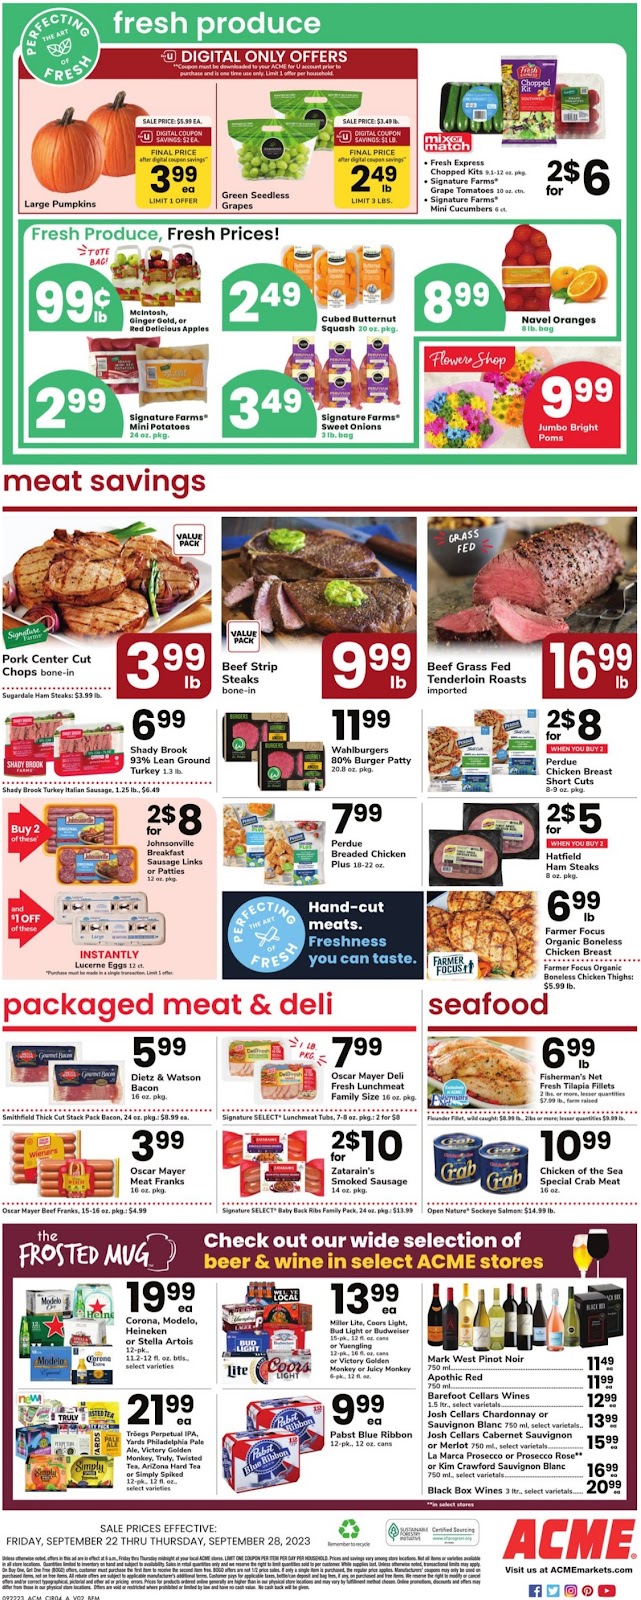 Acme Weekly Ad - 3